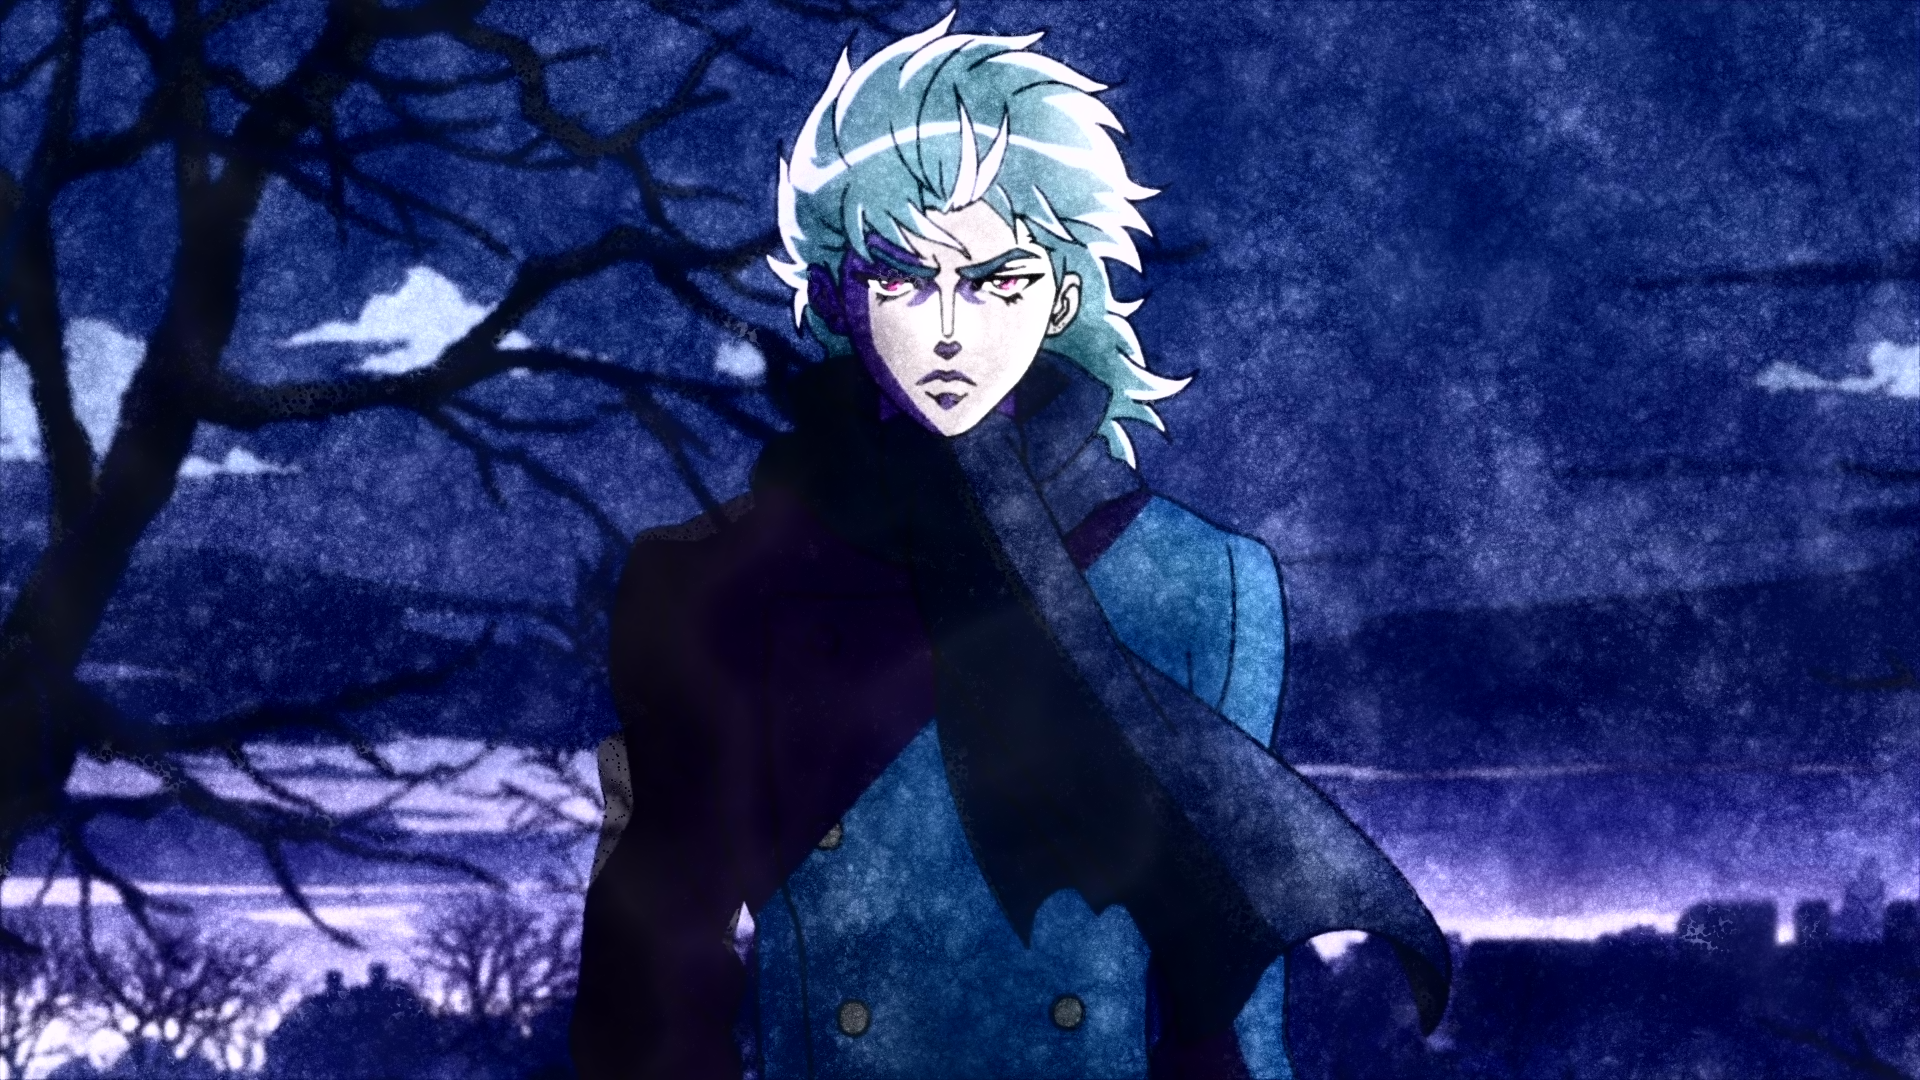 70 Dio Brando Hd Wallpapers Background Images